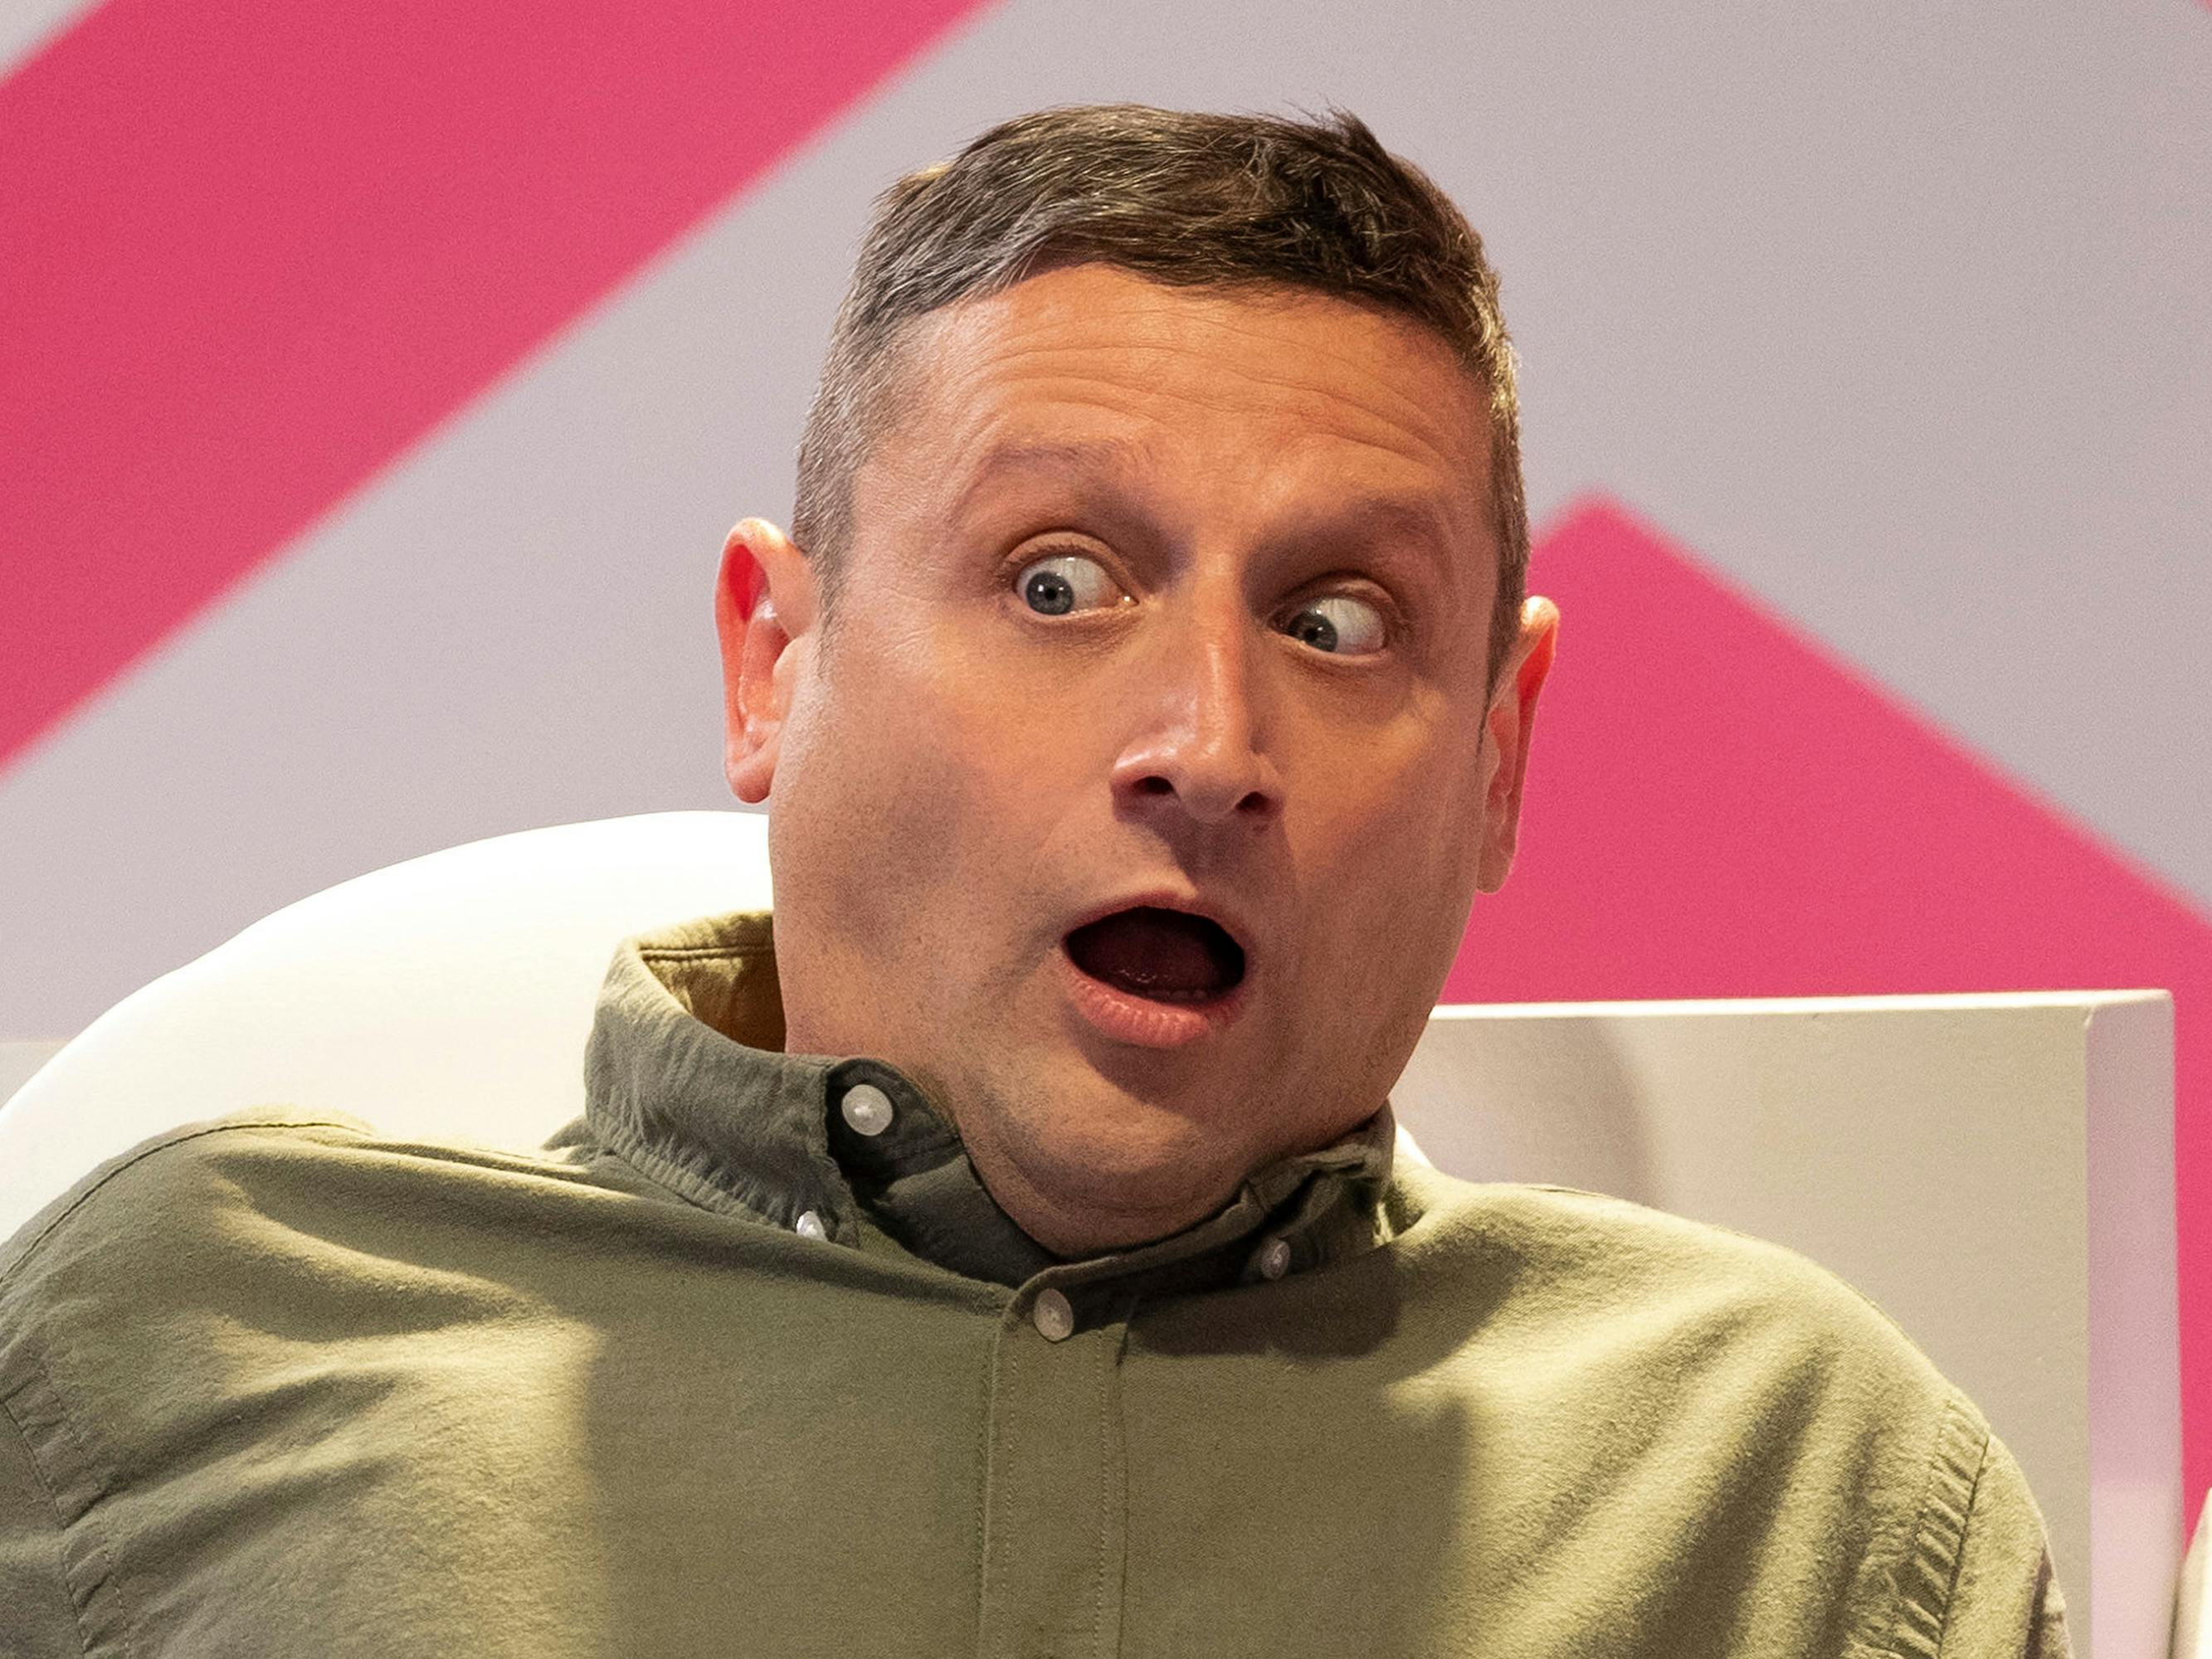 Tim Robinson wears a green shirt and looks shocked.